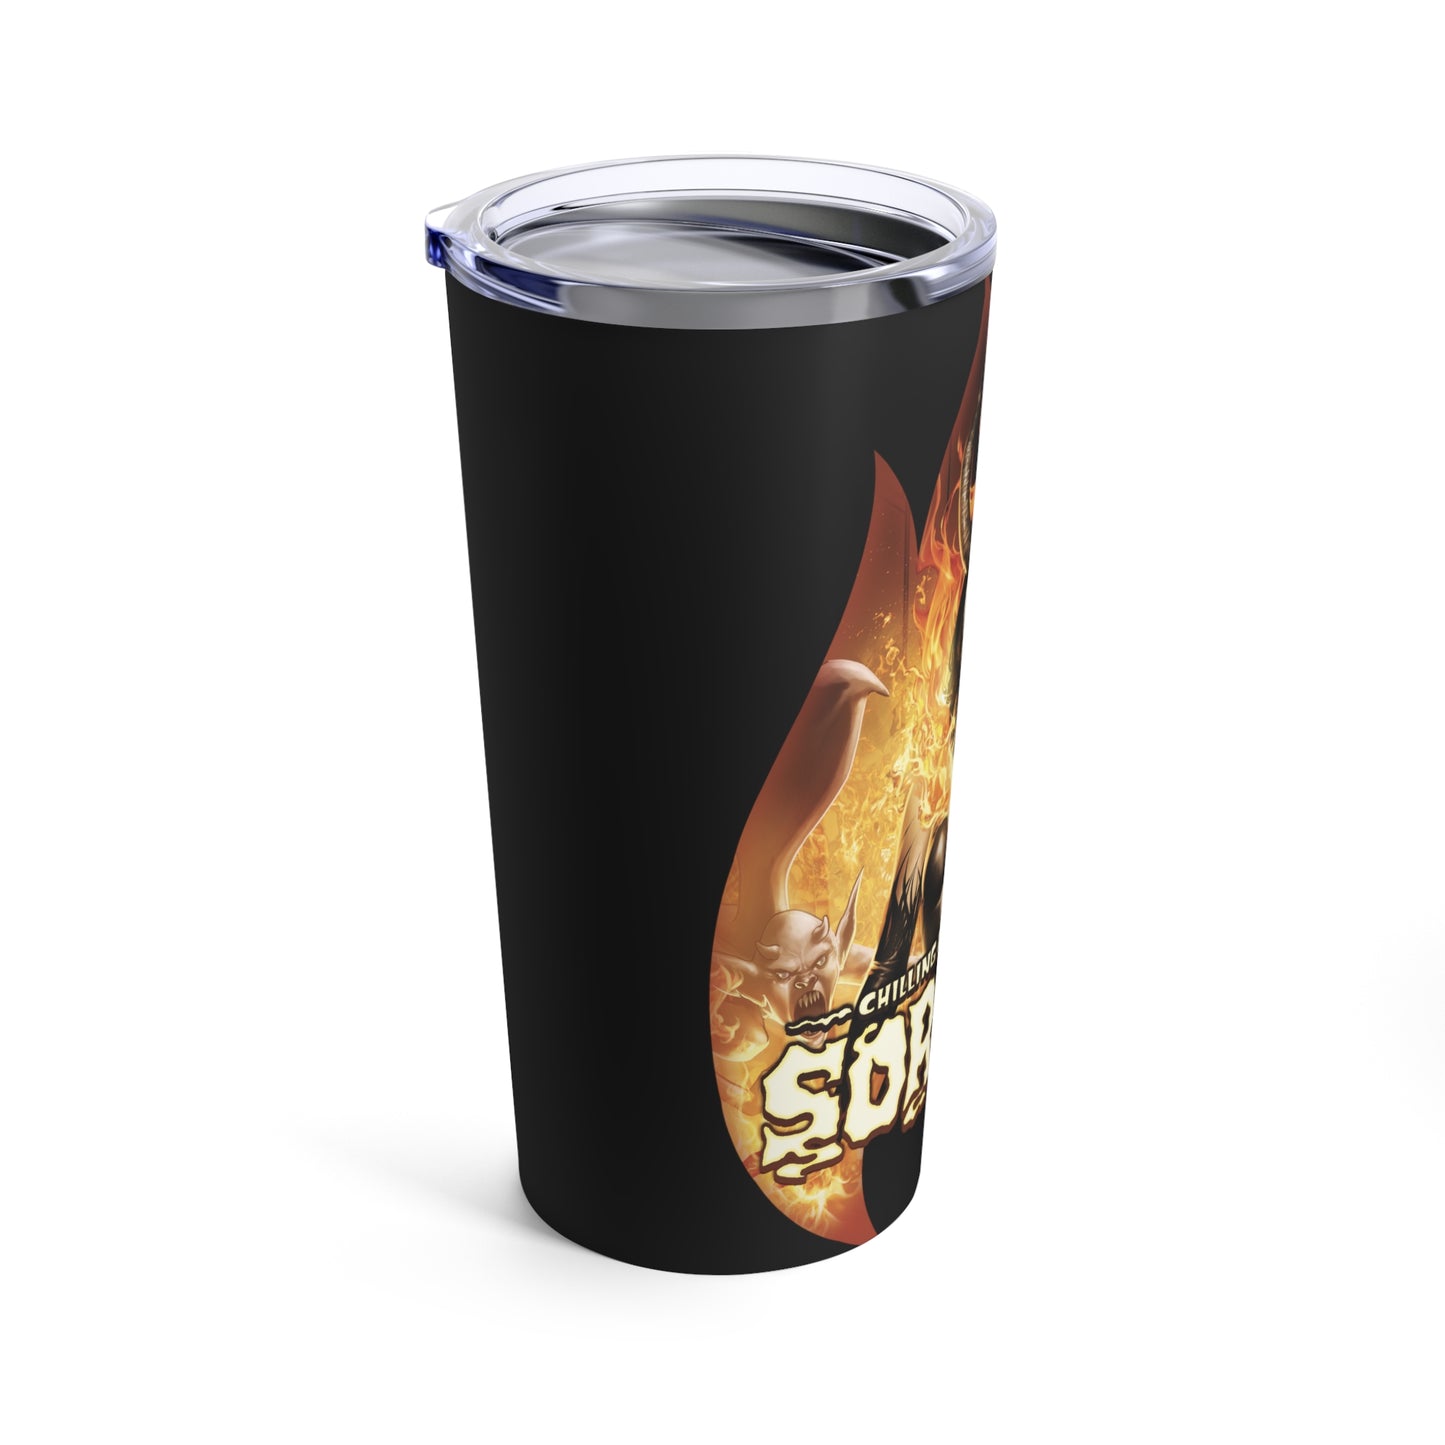 Chilling Adventures in Sorcery Stainless Steal Tumbler 20oz Featuring Madam Satan